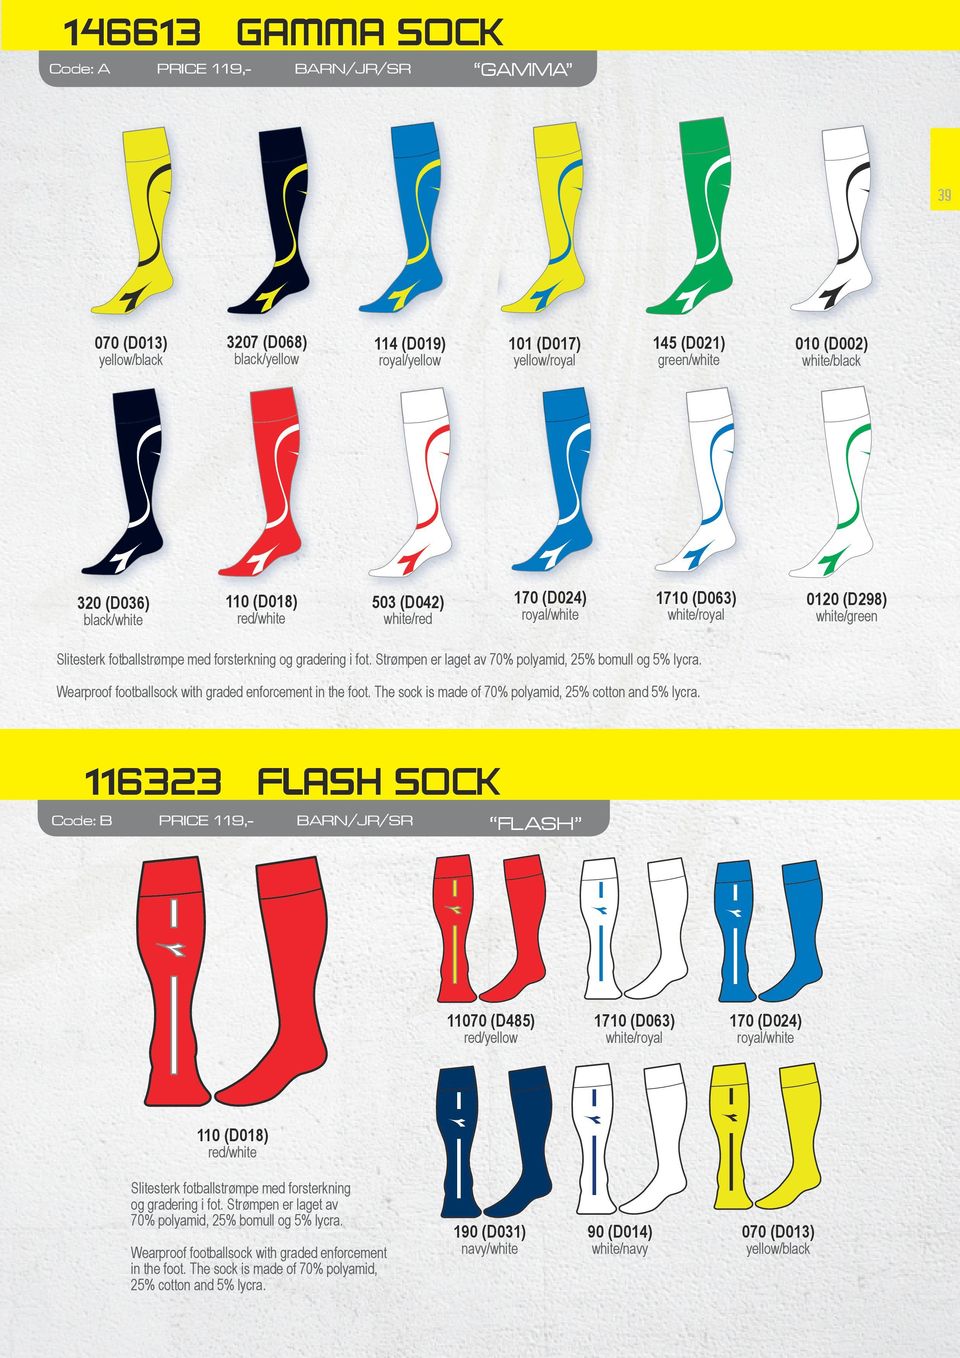 Wearproof footballsock with graded enforcement in the foot. The sock is made of 70% polyamid, 25% cotton and 5% lycra.